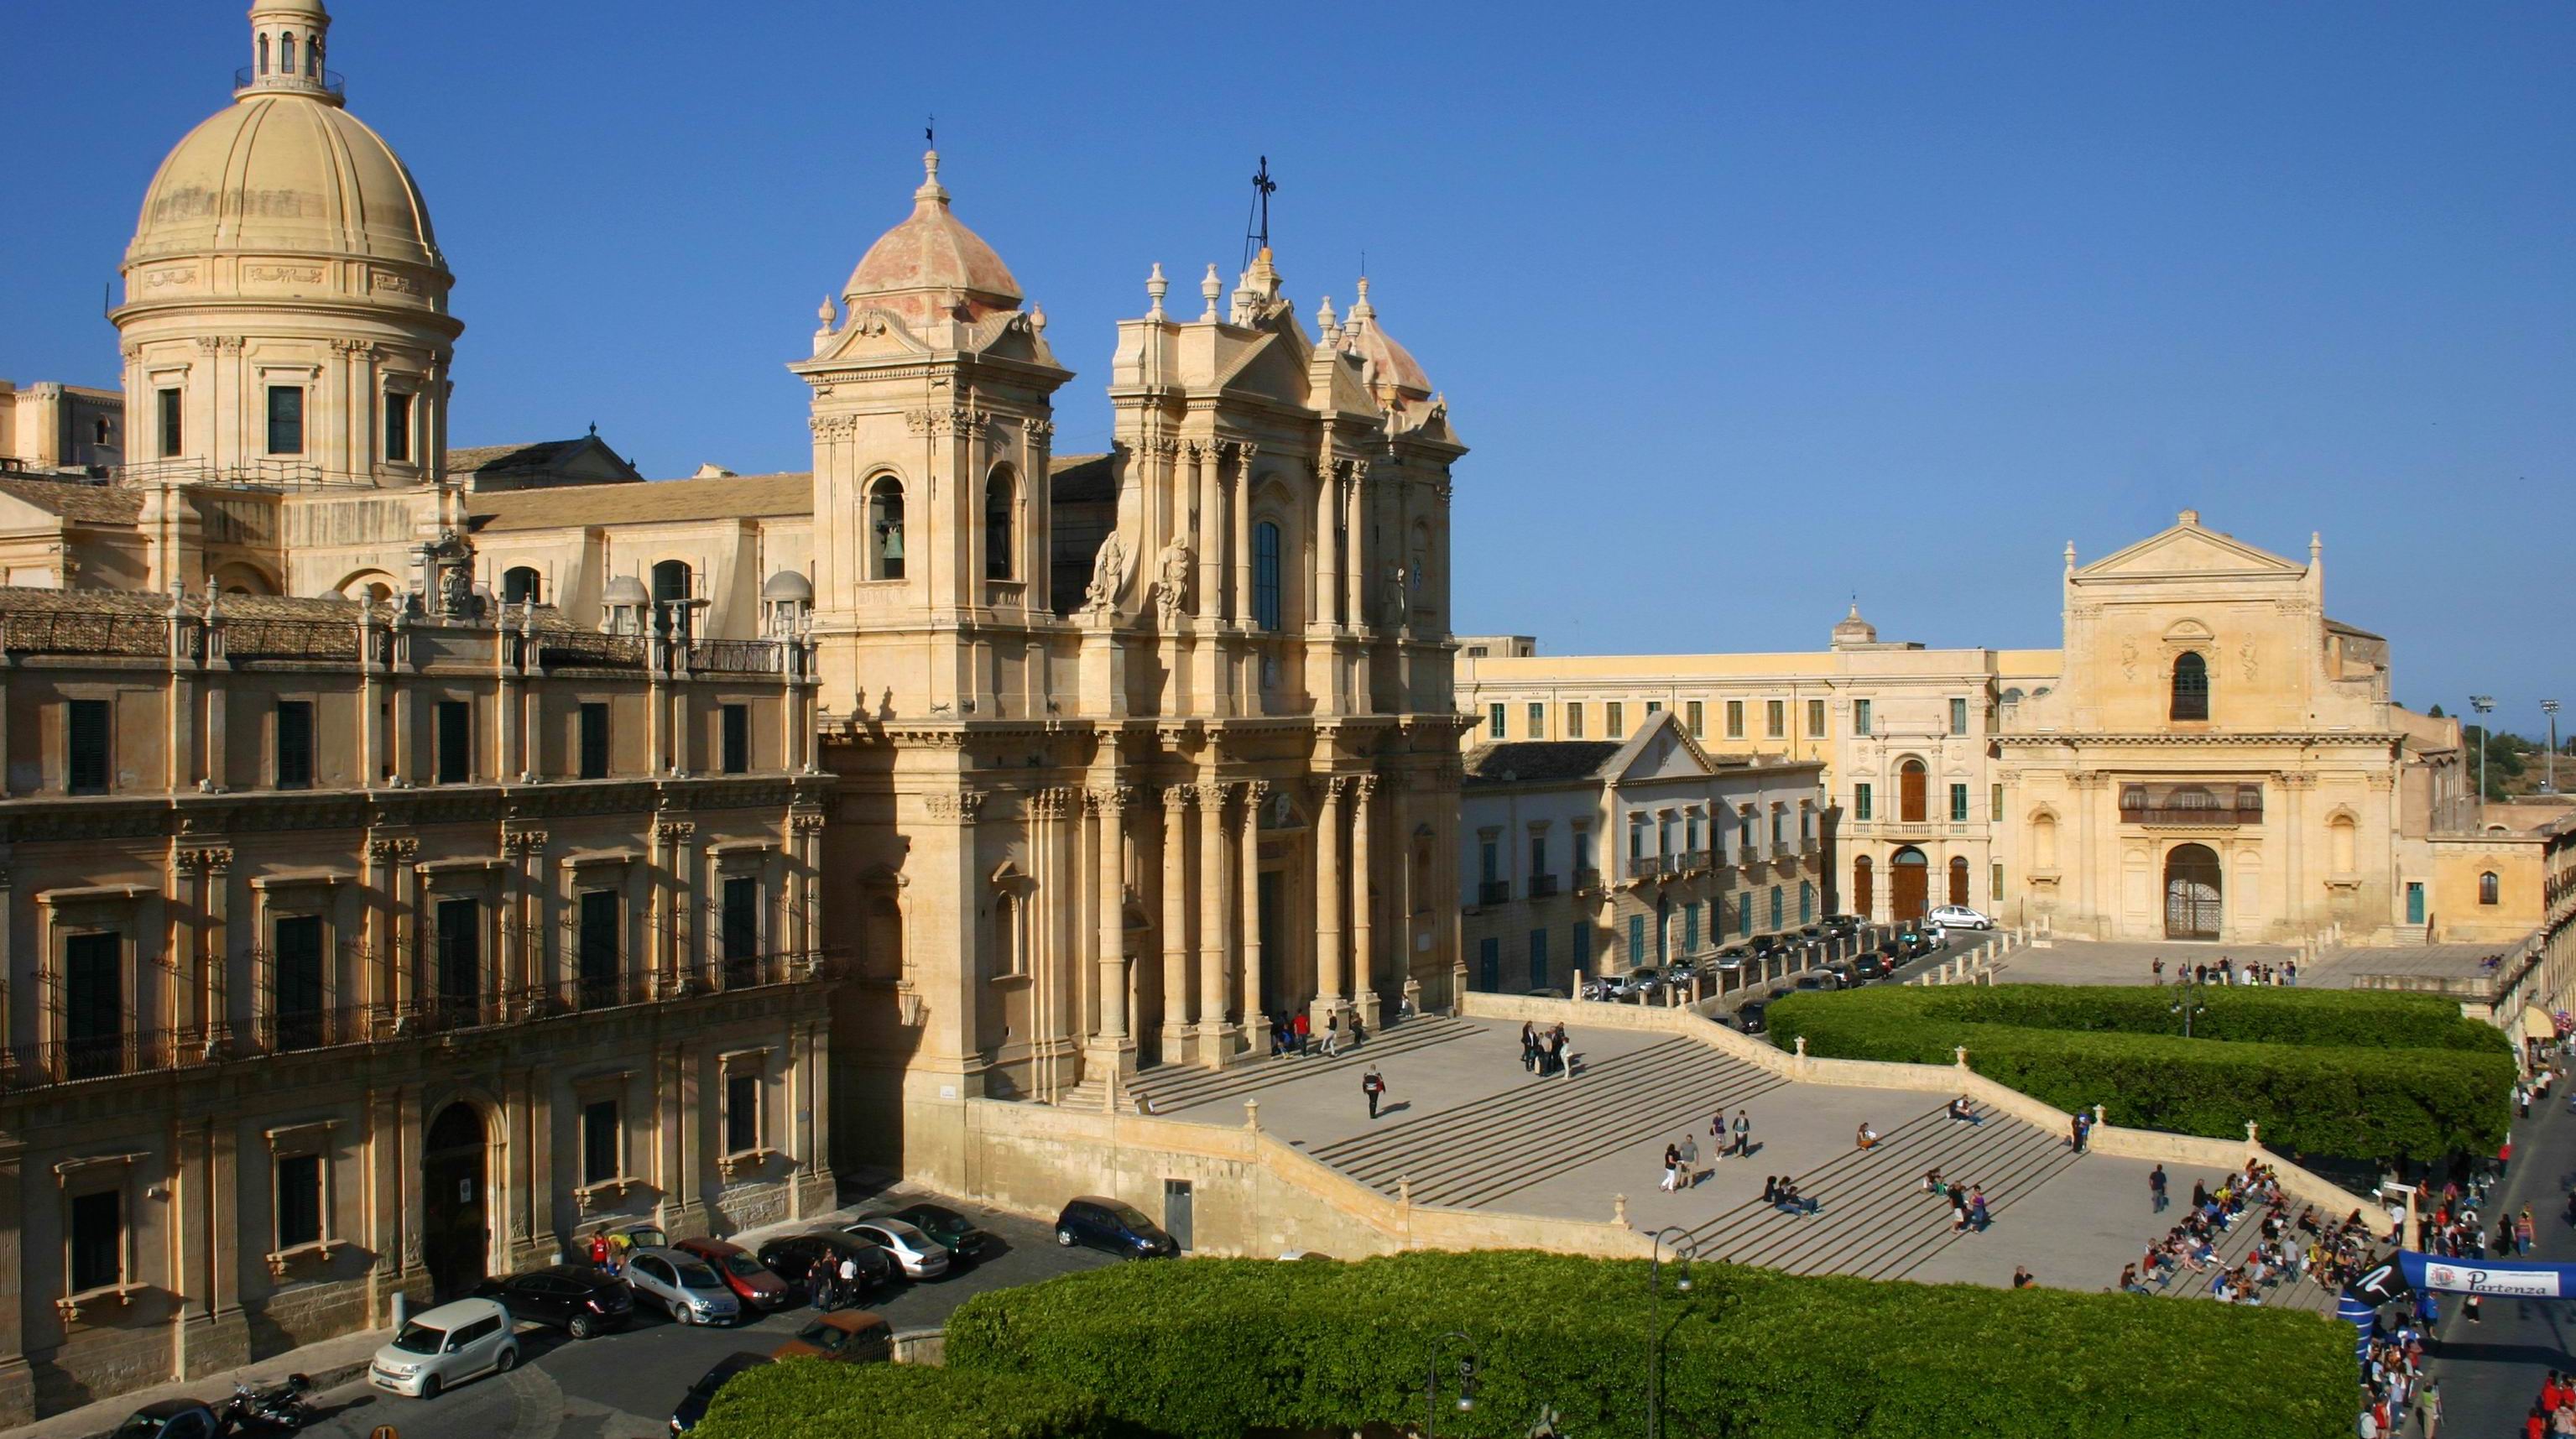 Cathedral_of_Noto.JPG